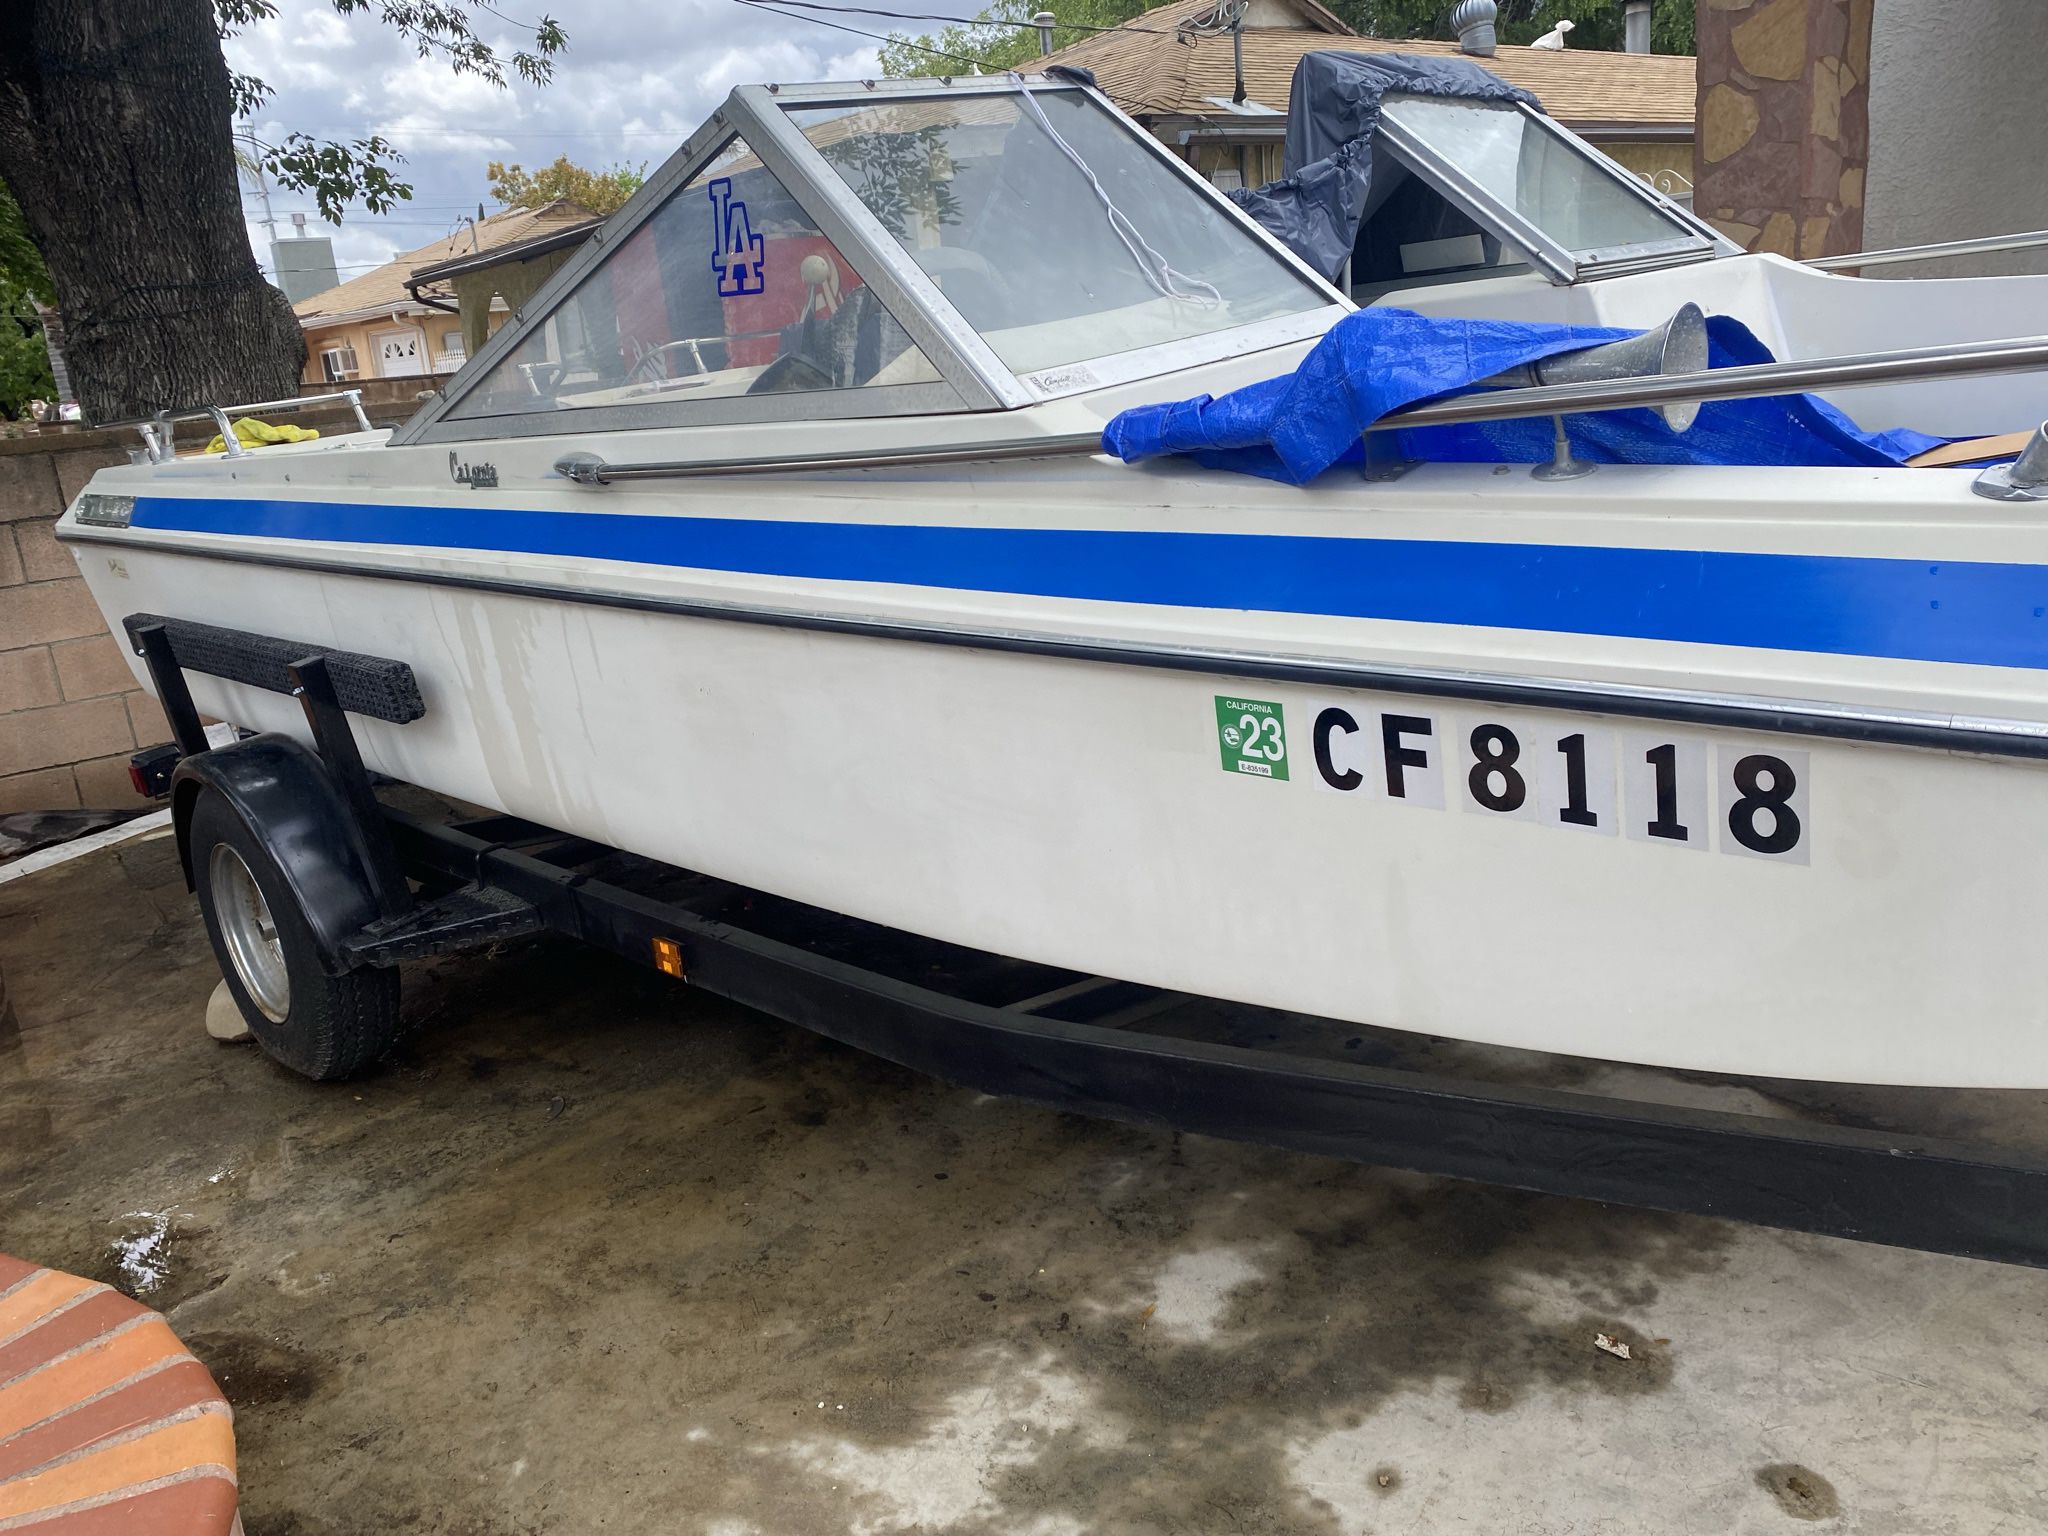 17 Foot Project Boat With Clean Trailer Hitch 